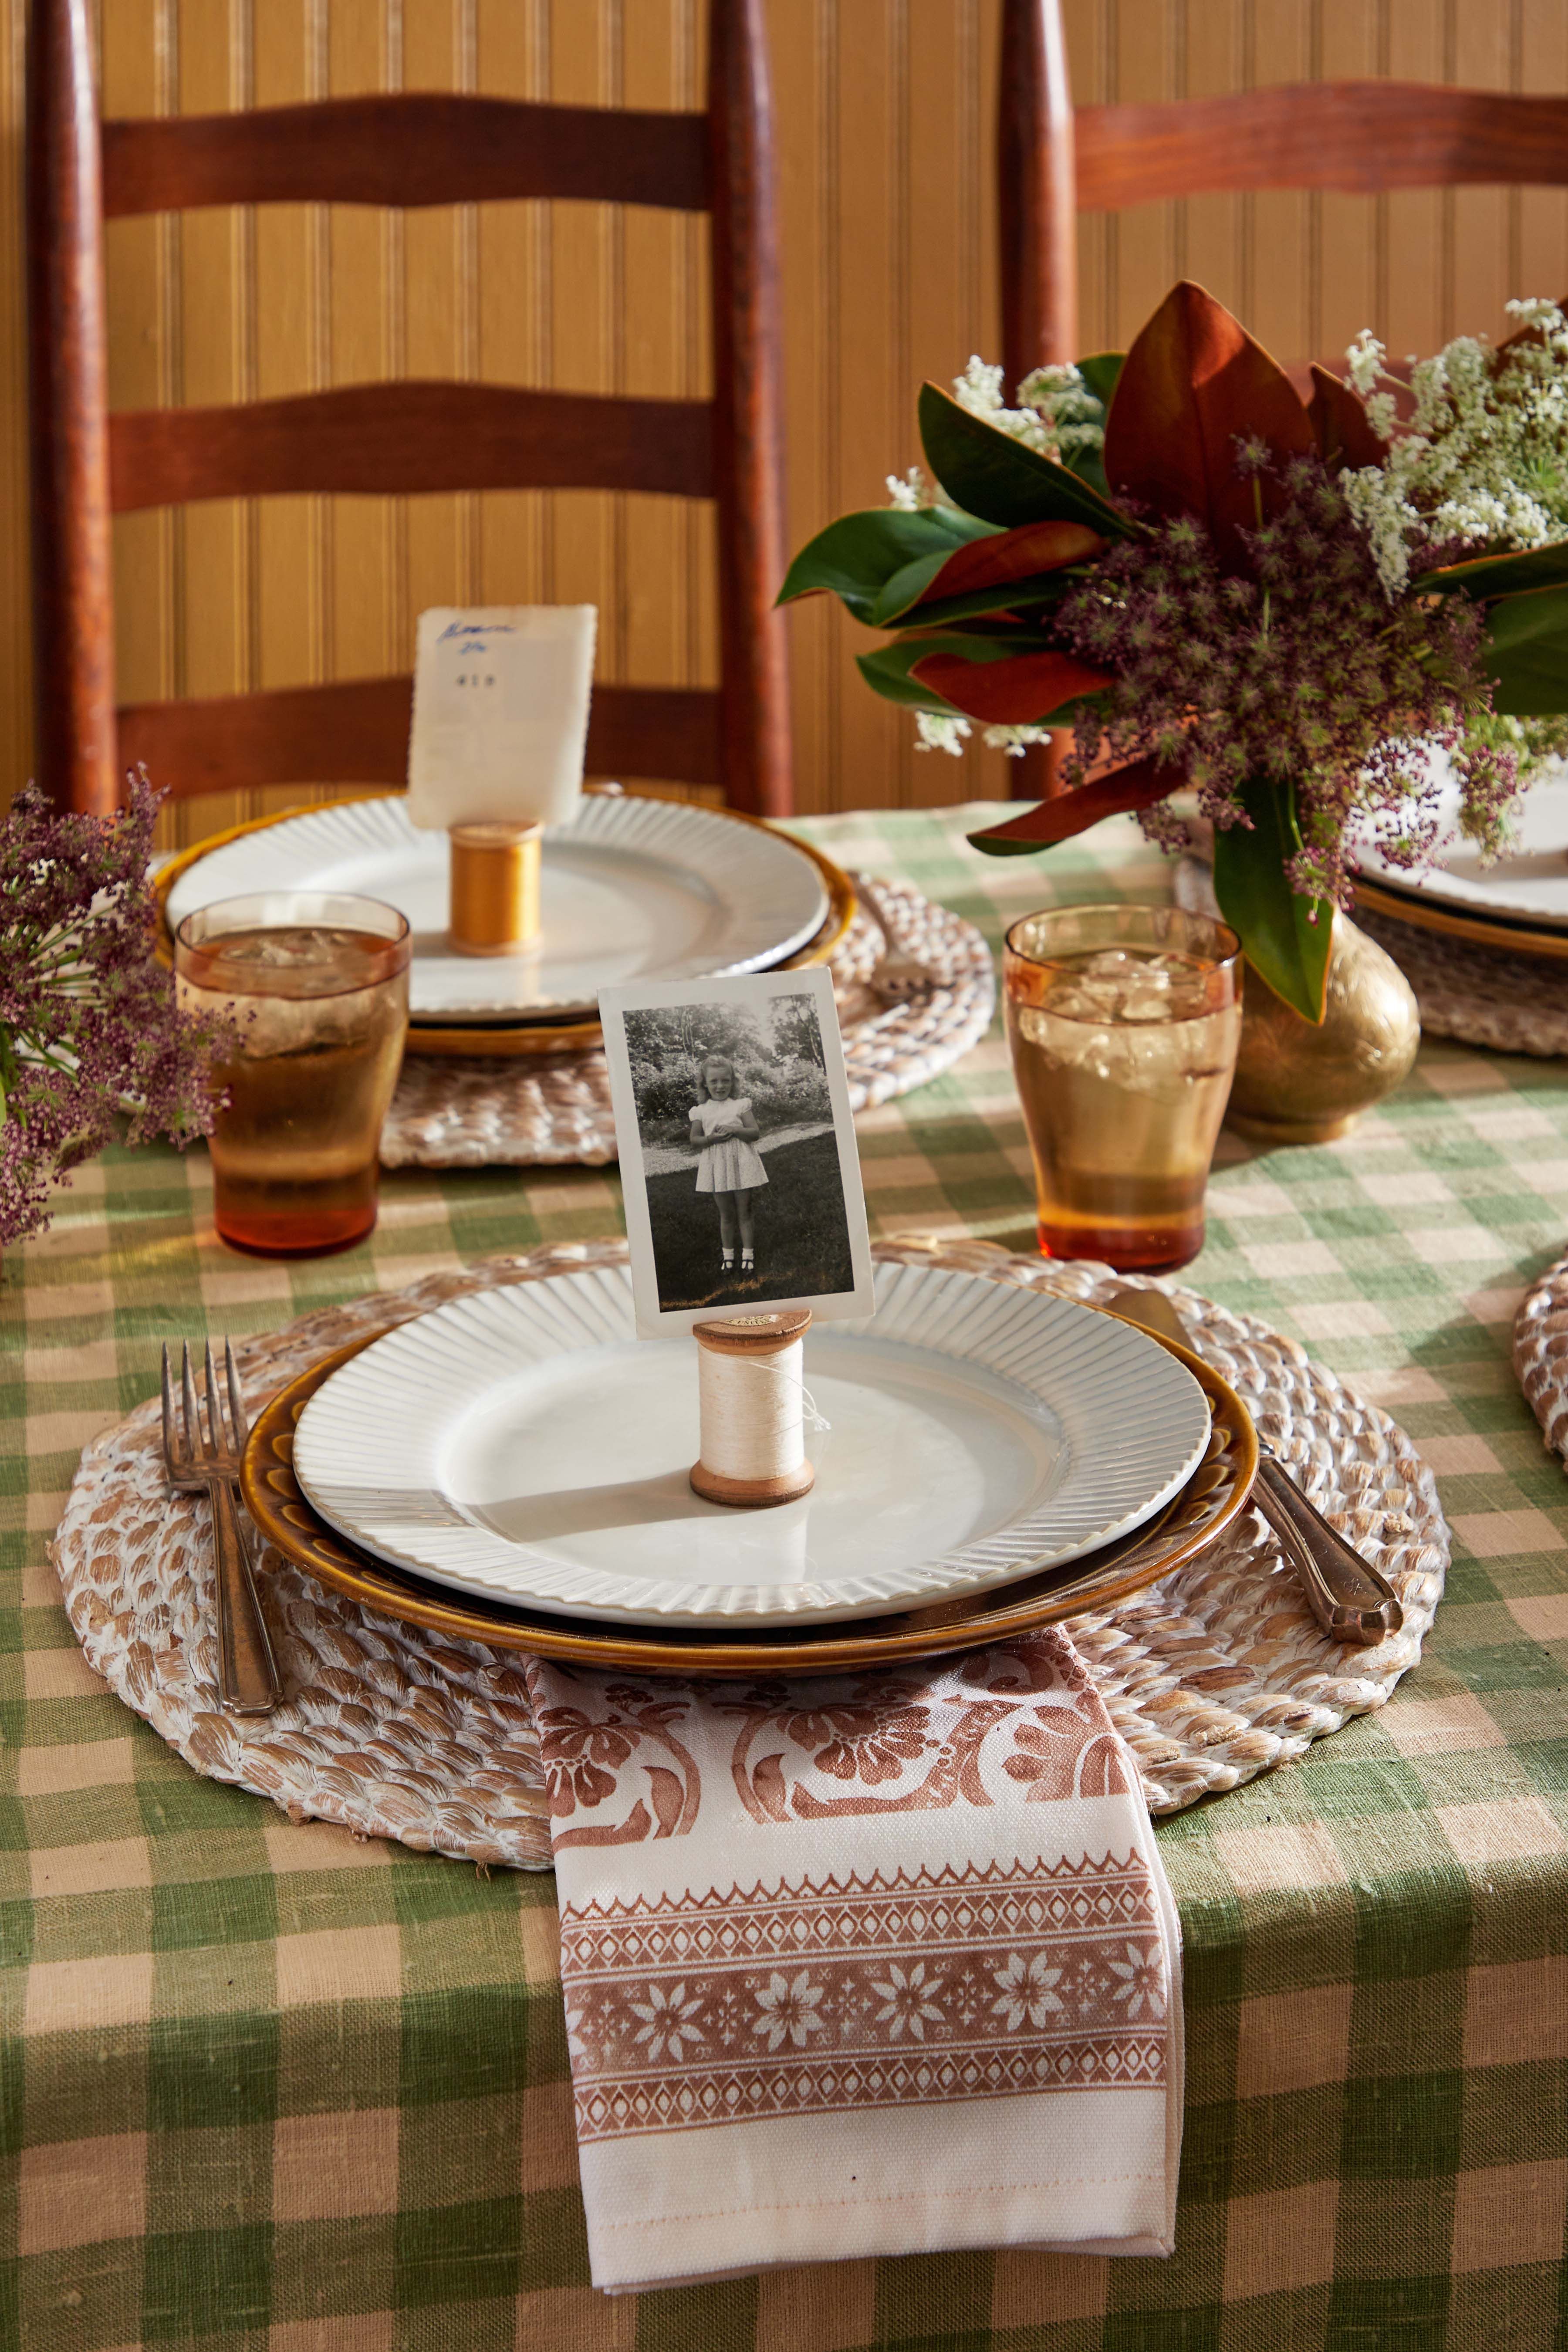 5 Steps to Set an Outdoor Thanksgiving Table - Sanctuary Home Decor